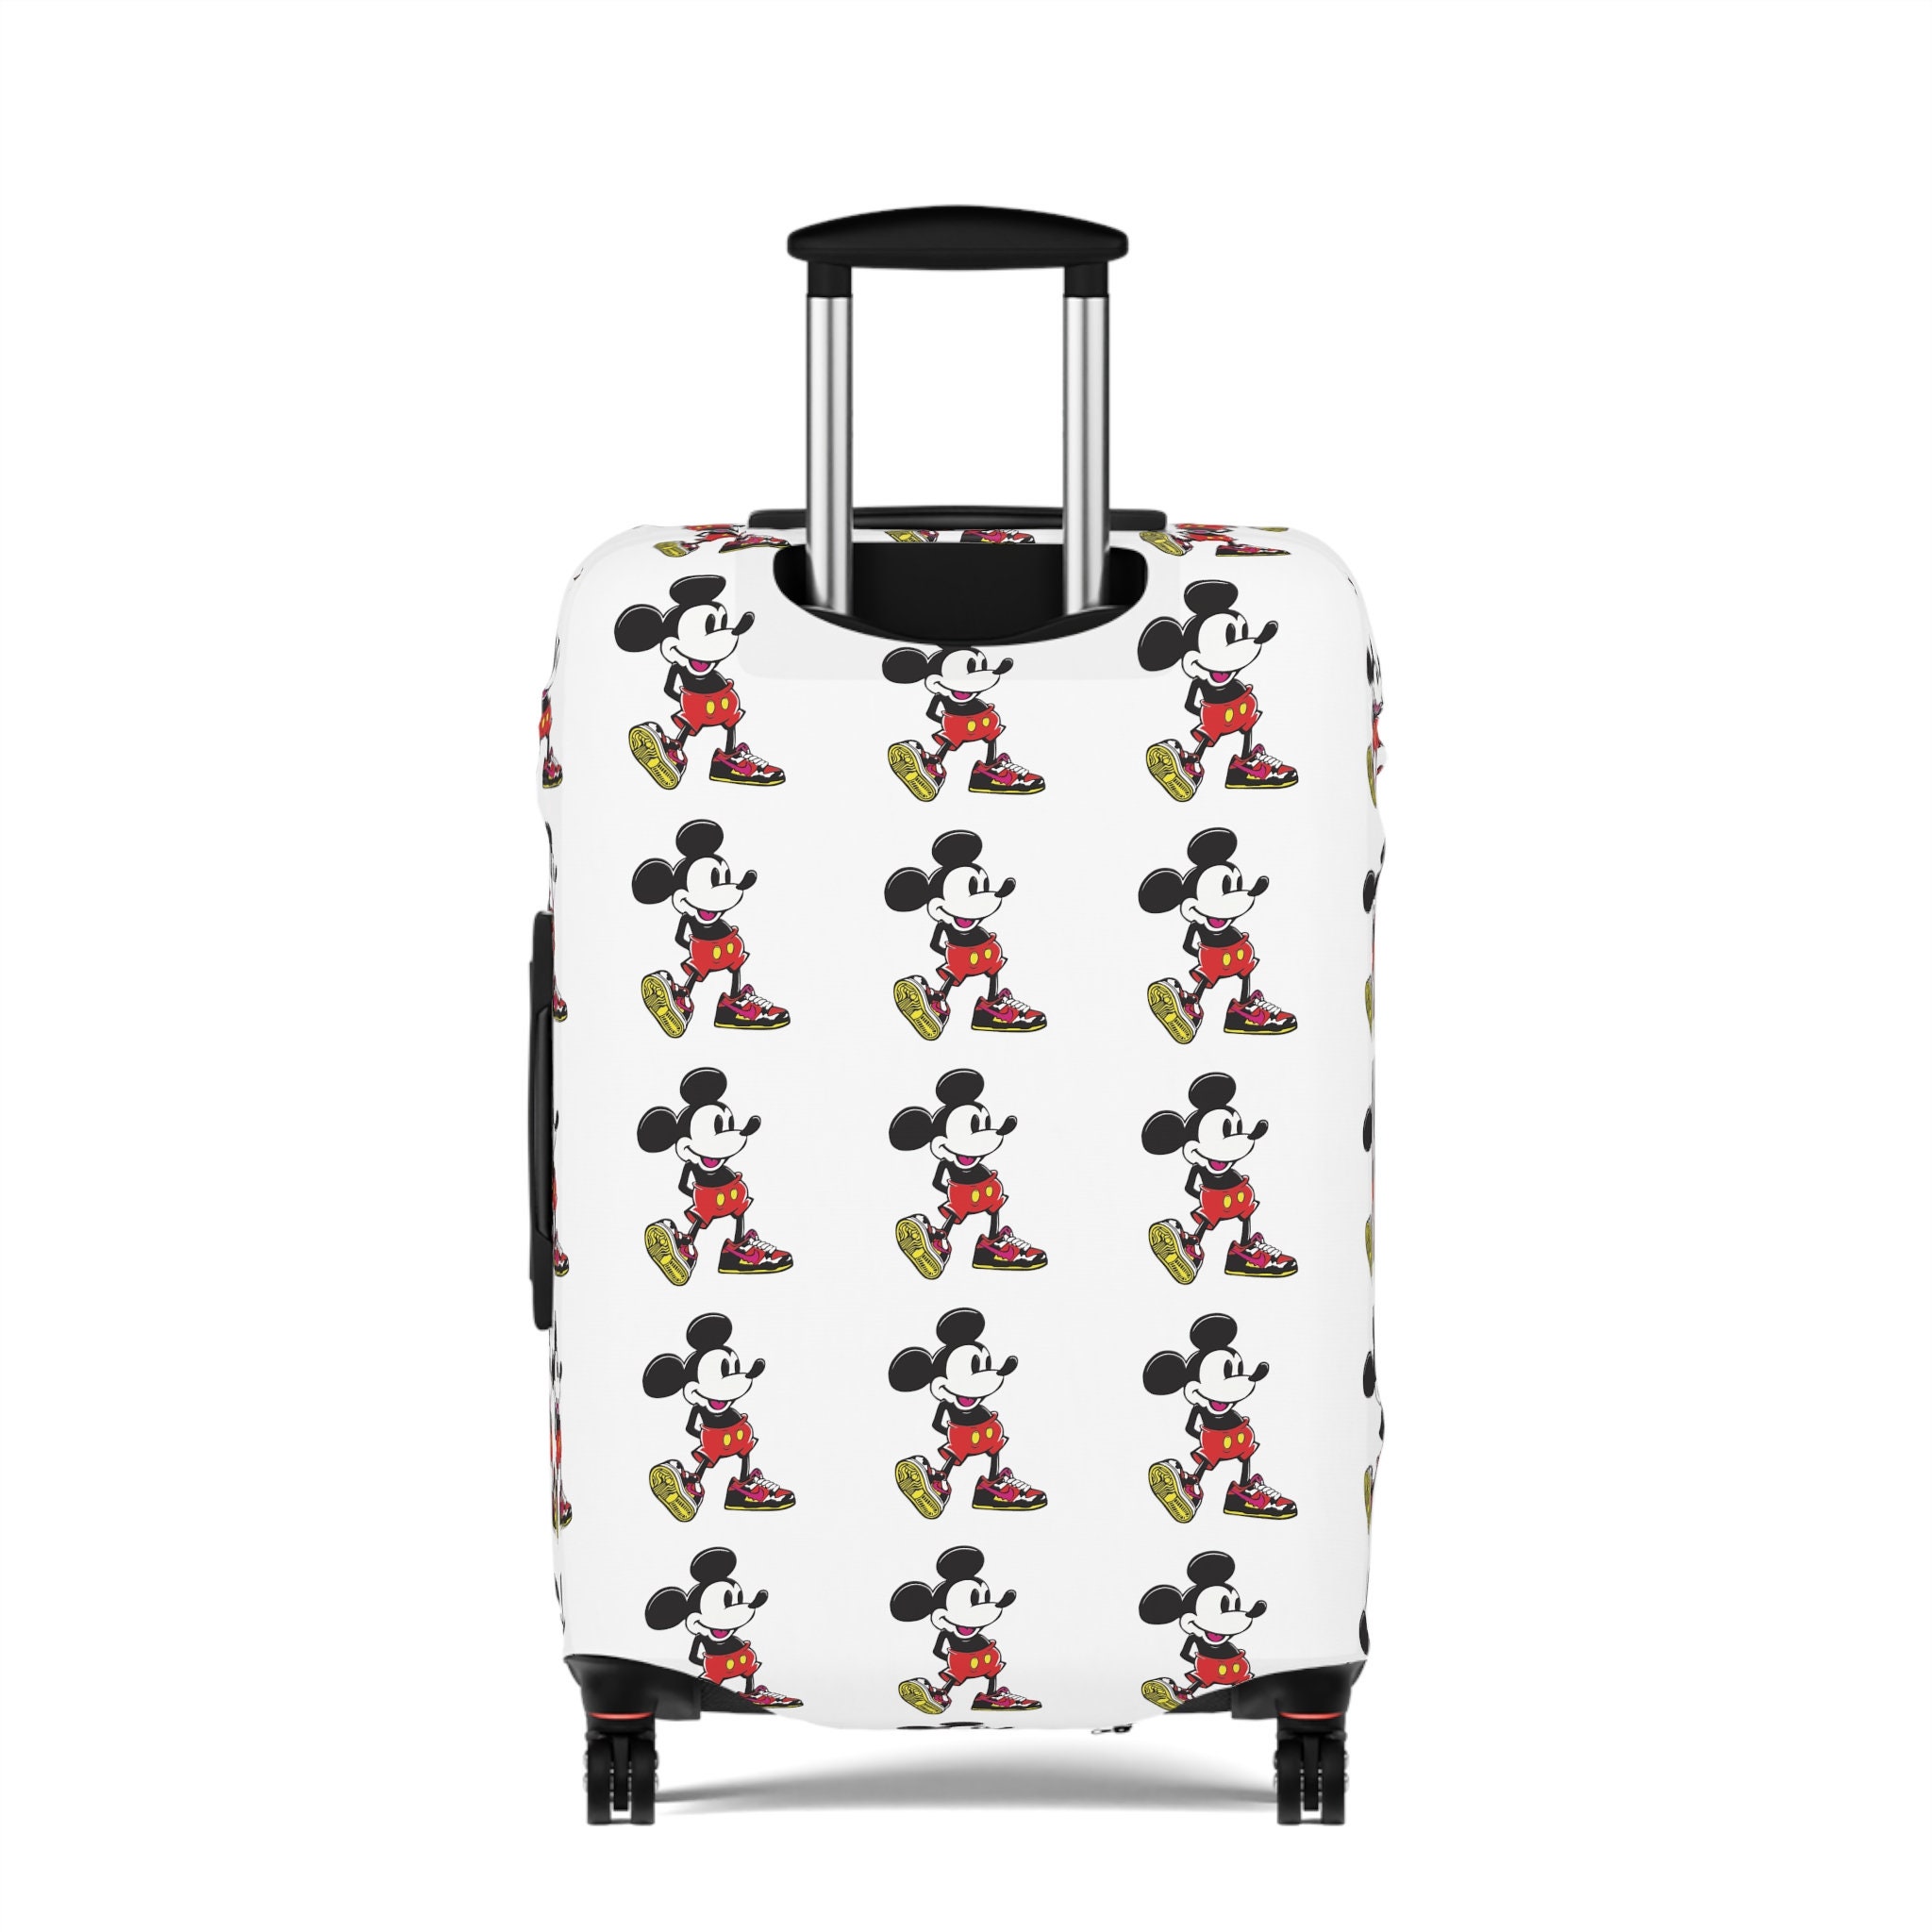 Sneakerhead Mickey Mouse Luggage Cover